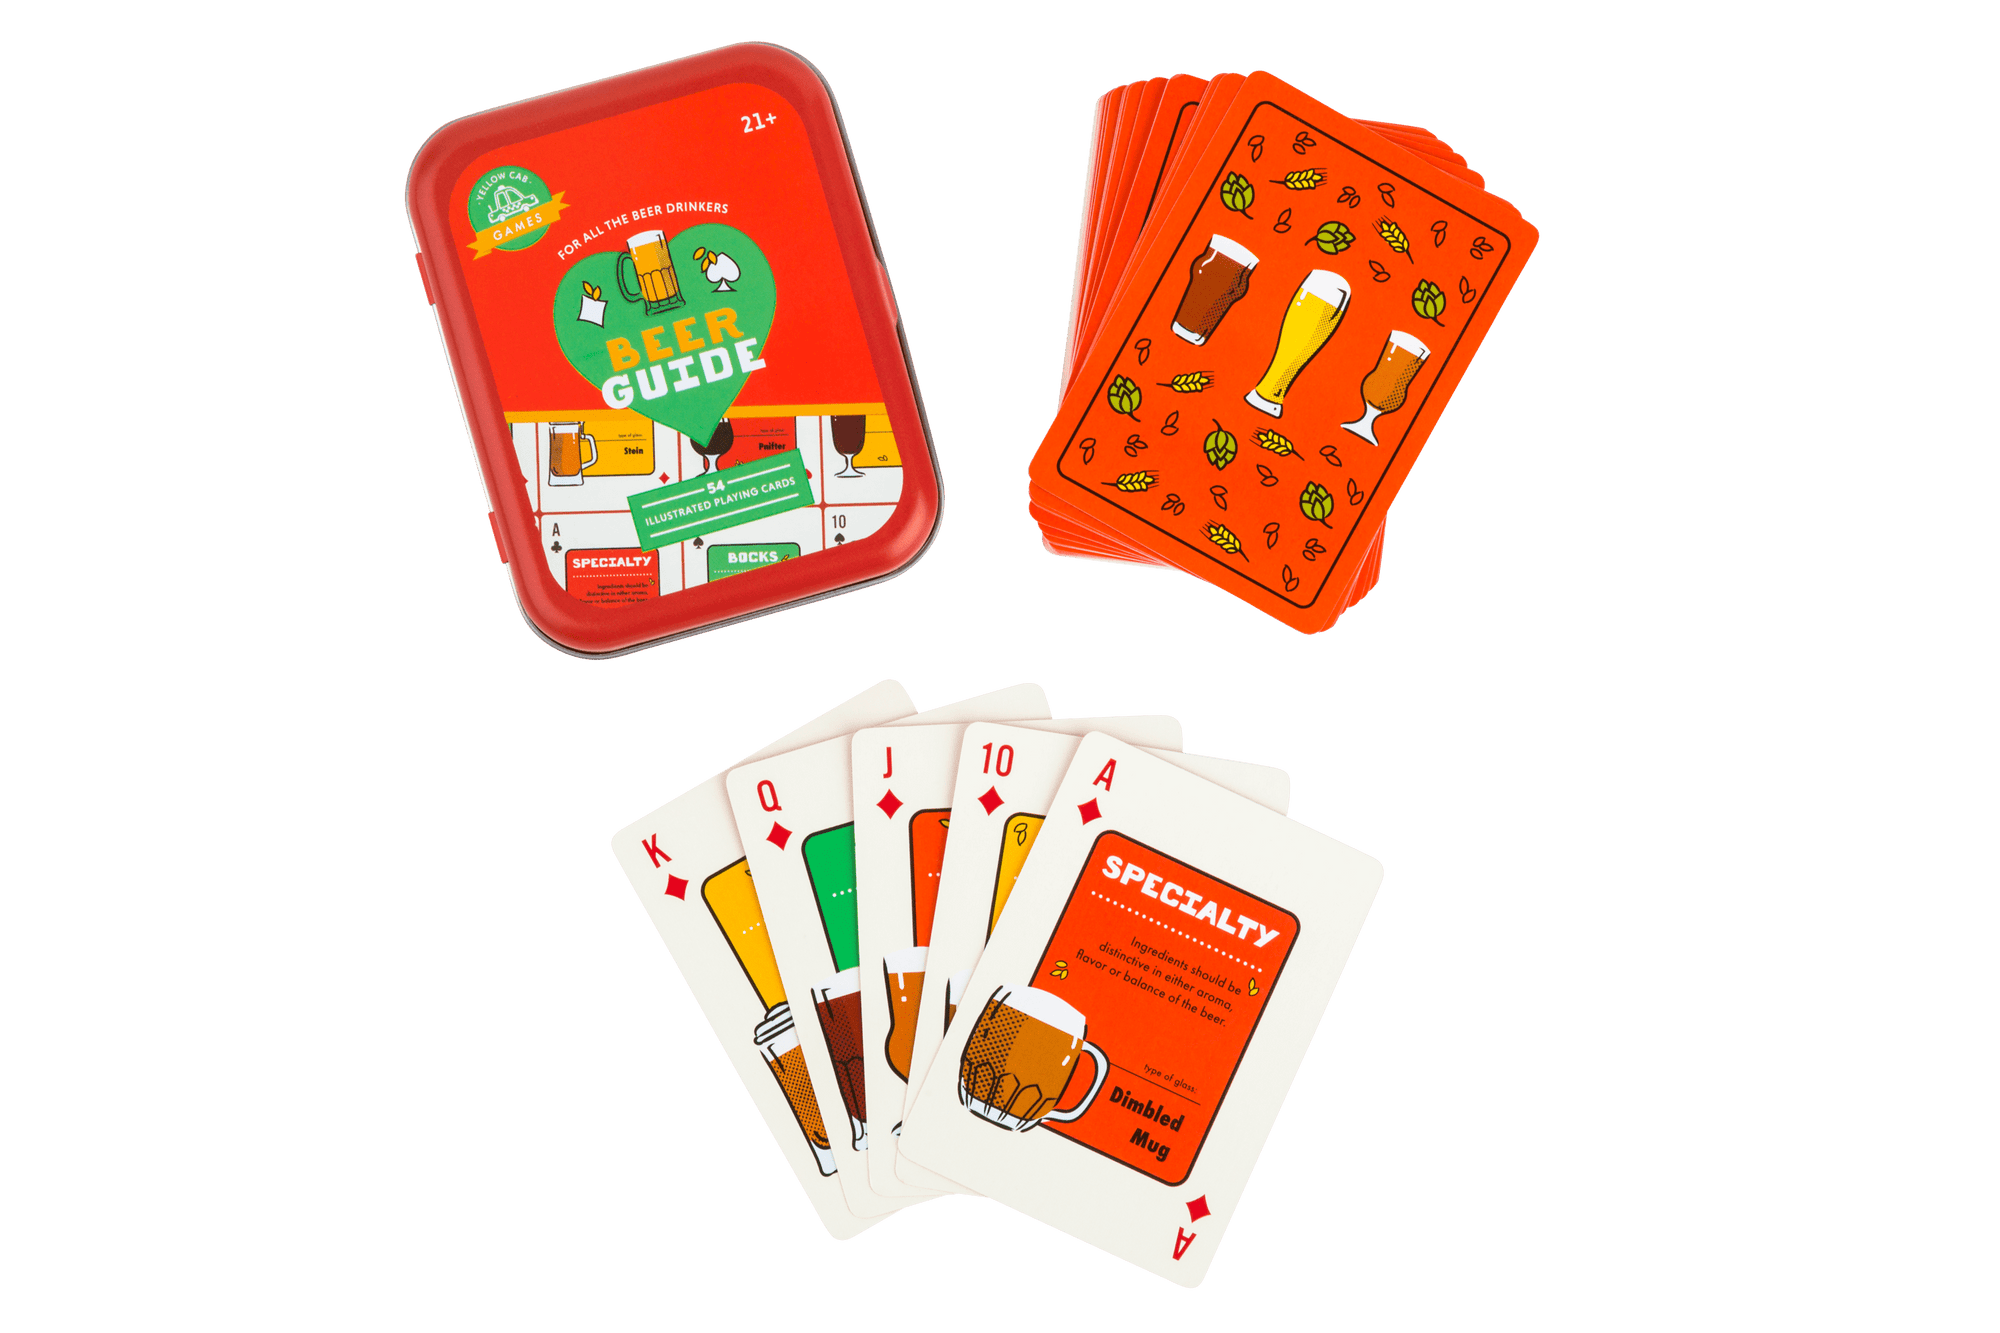 Beer Guide Playing Cards